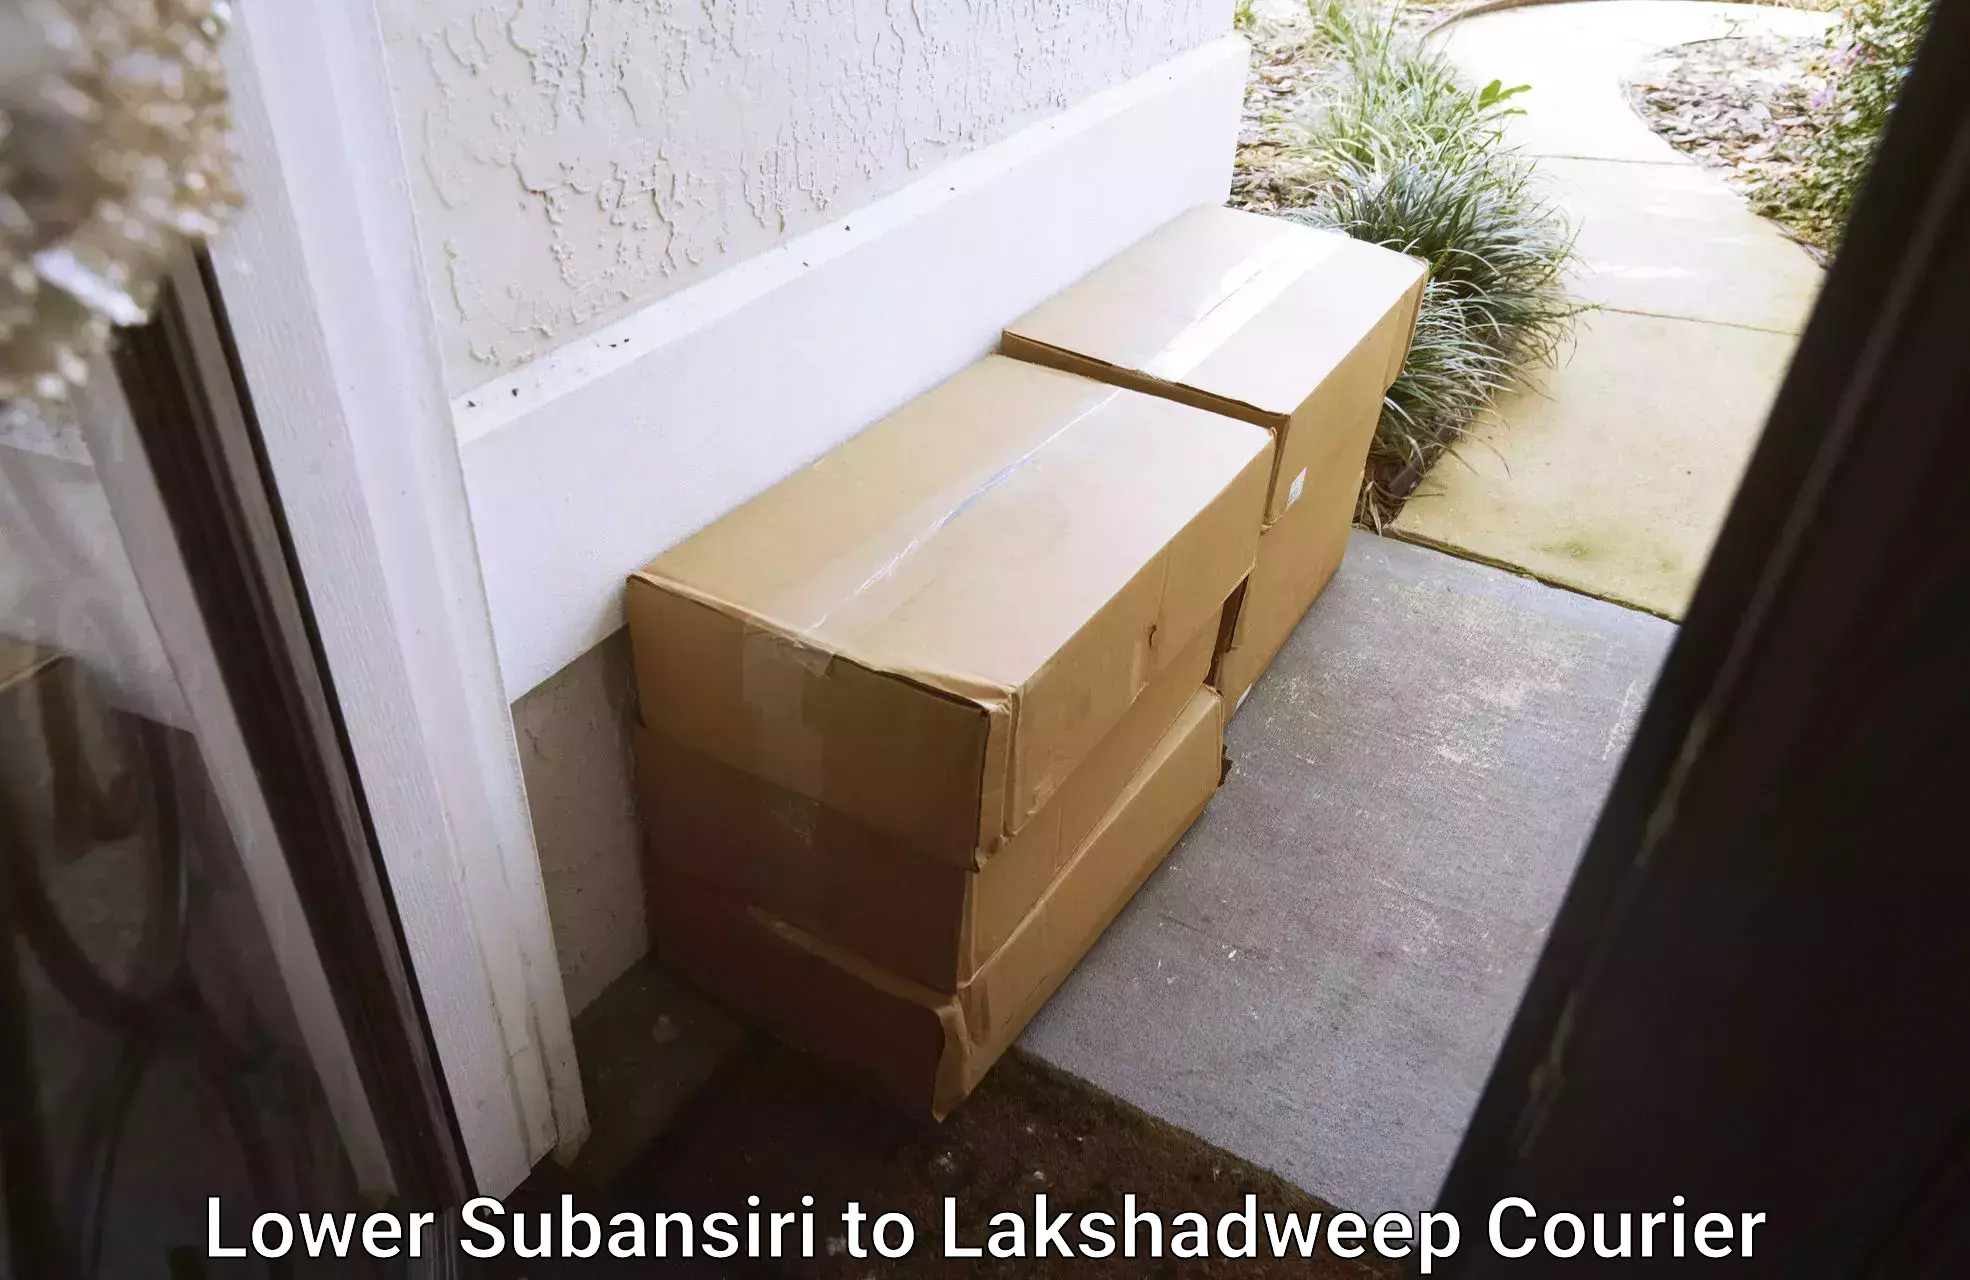 Enhanced delivery experience in Lower Subansiri to Lakshadweep